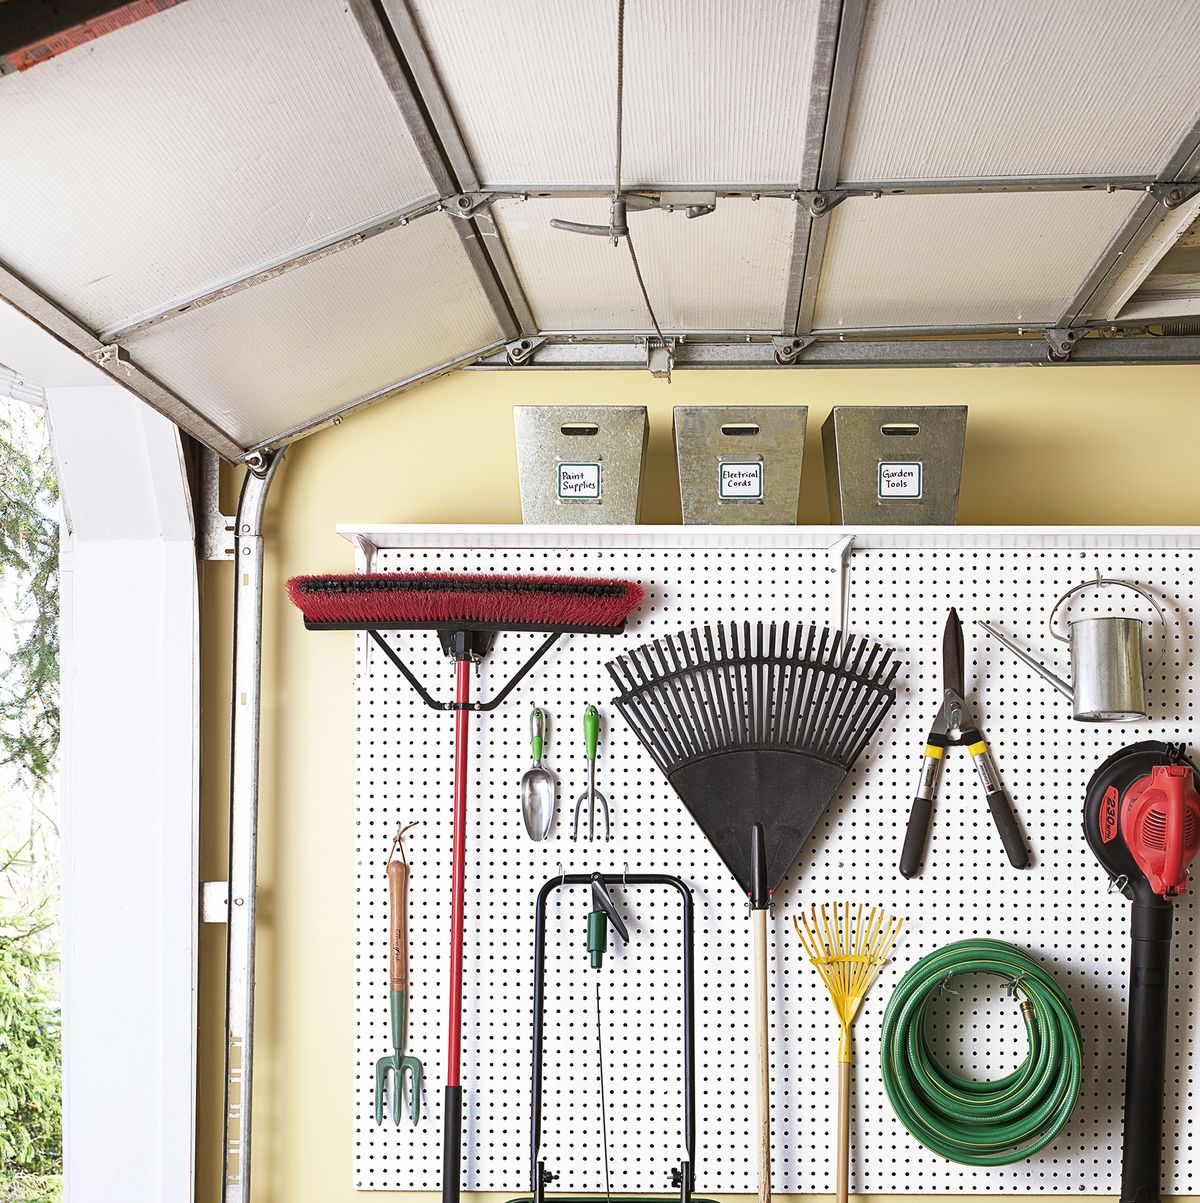 Creative Ideas for Your Garage